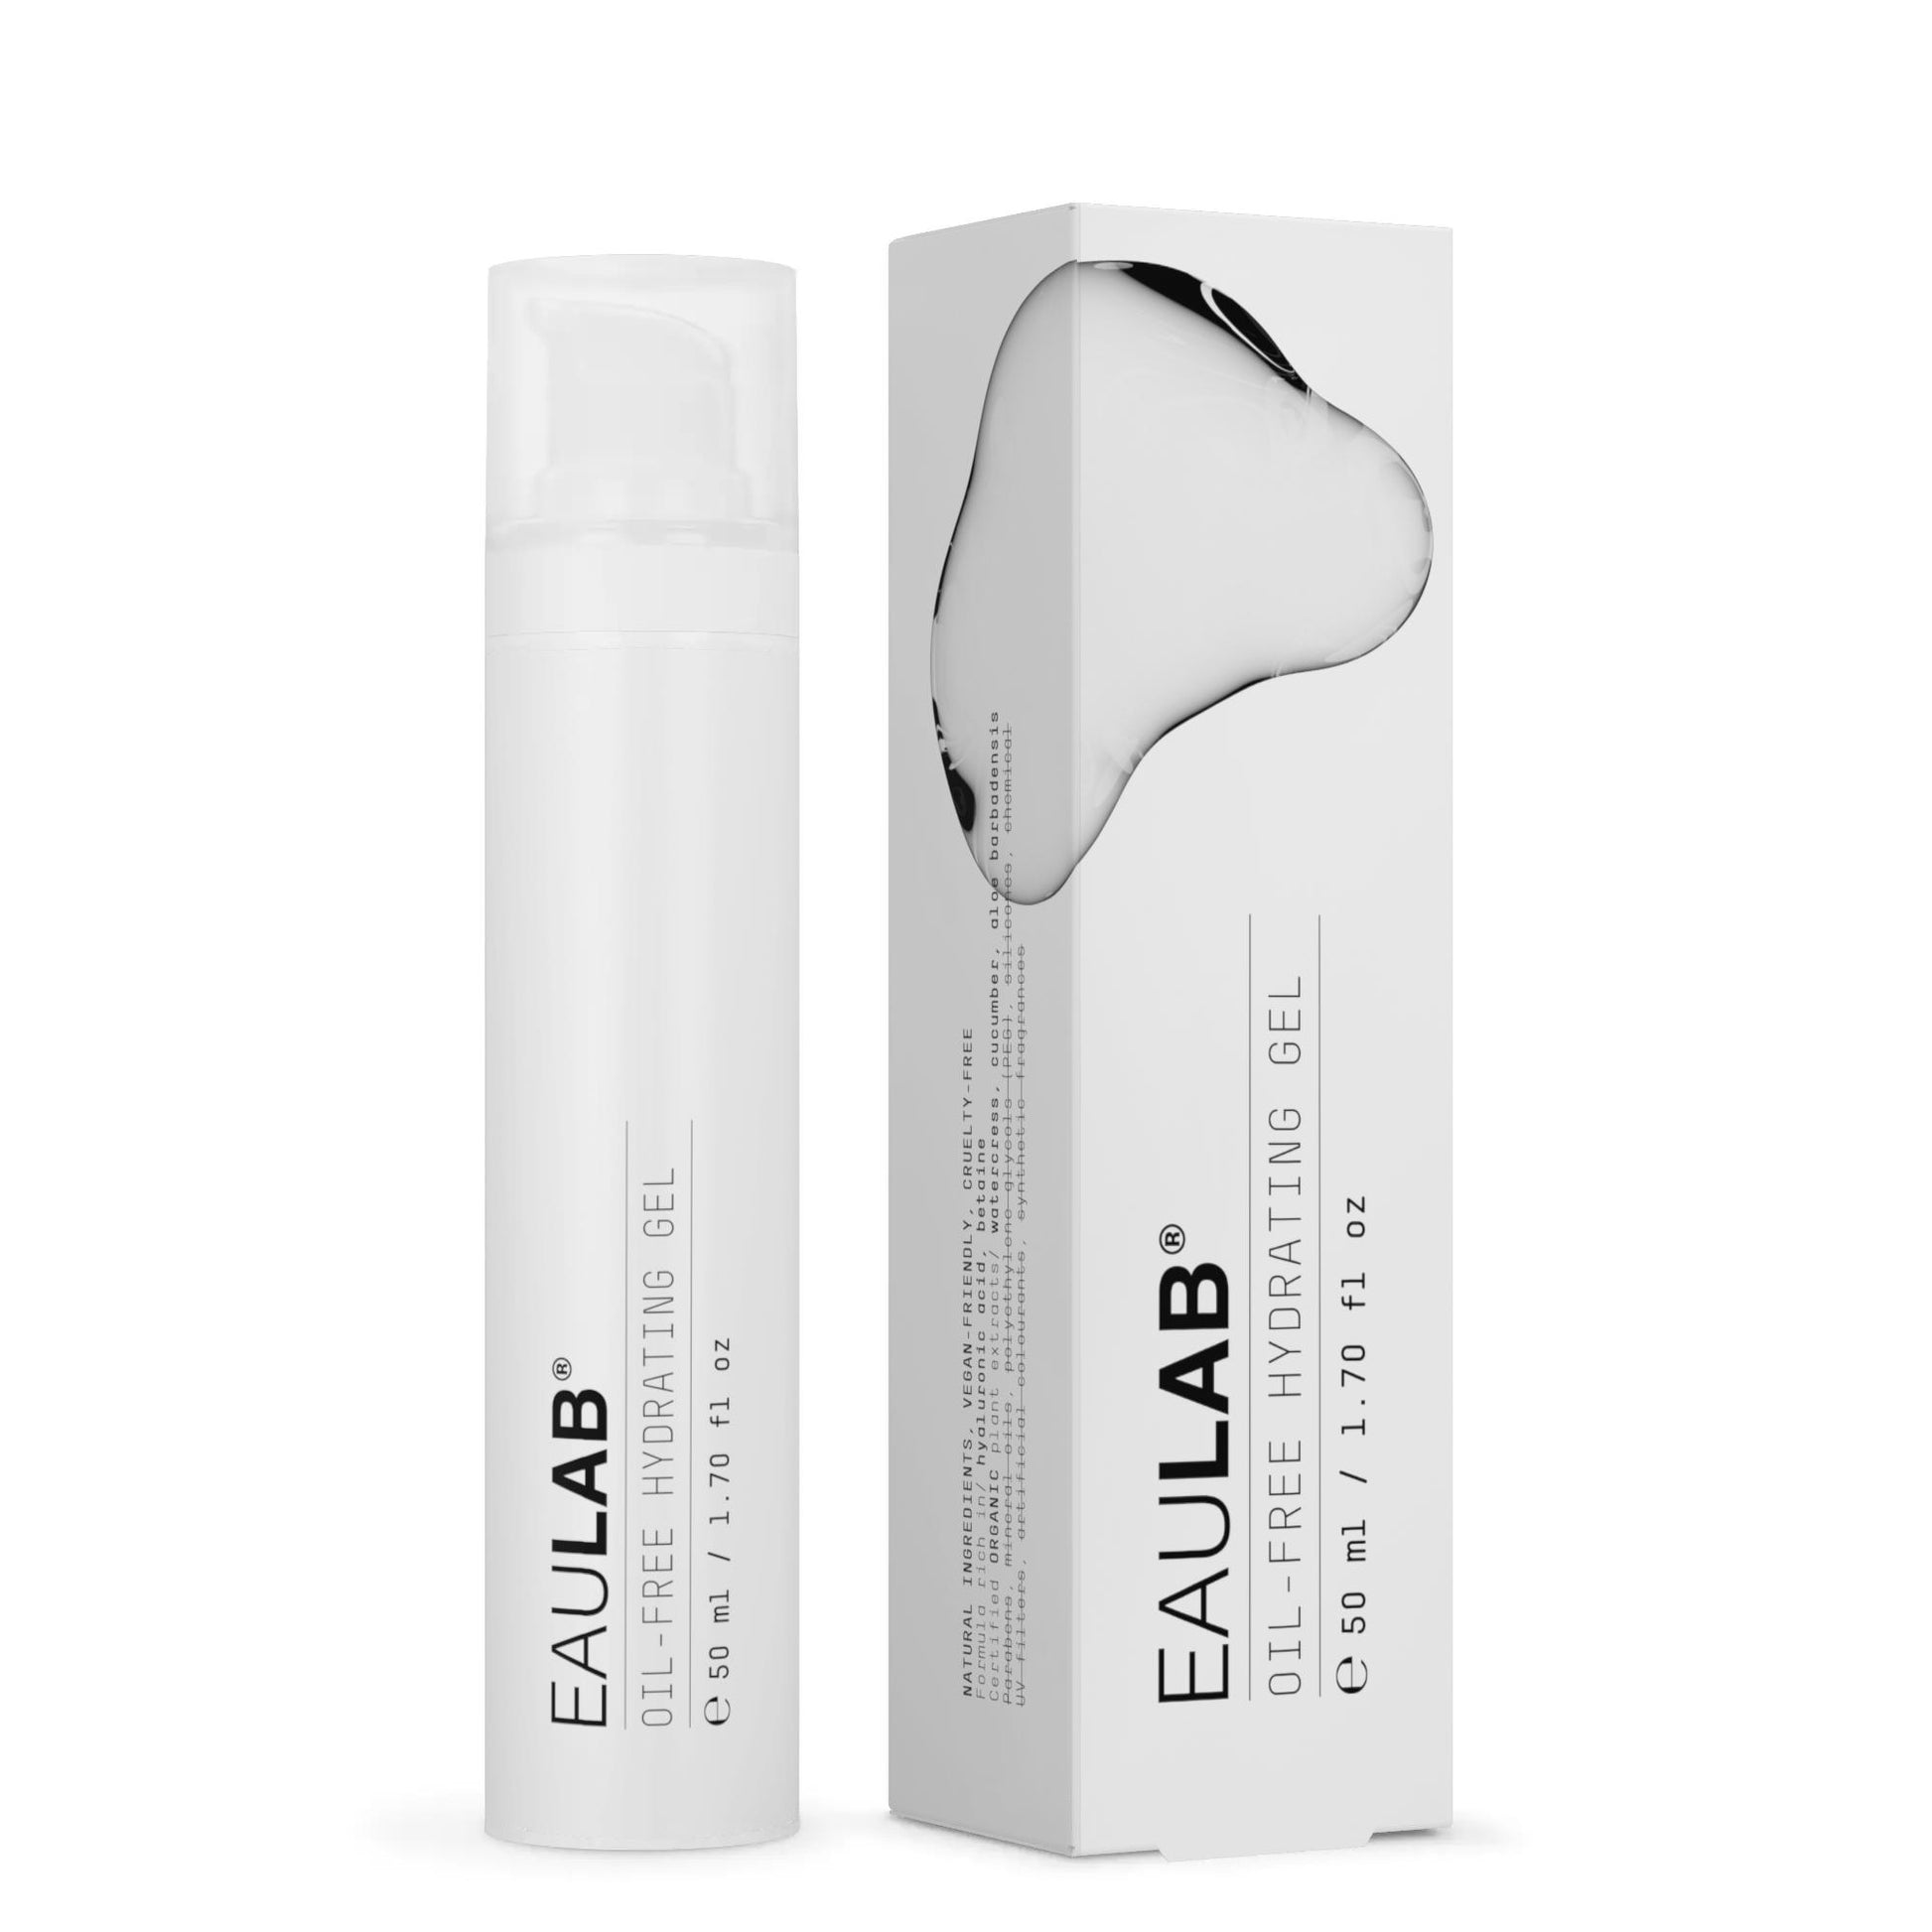 EauLab-Oil-Free-Hydrating-Gel-Product-Duo